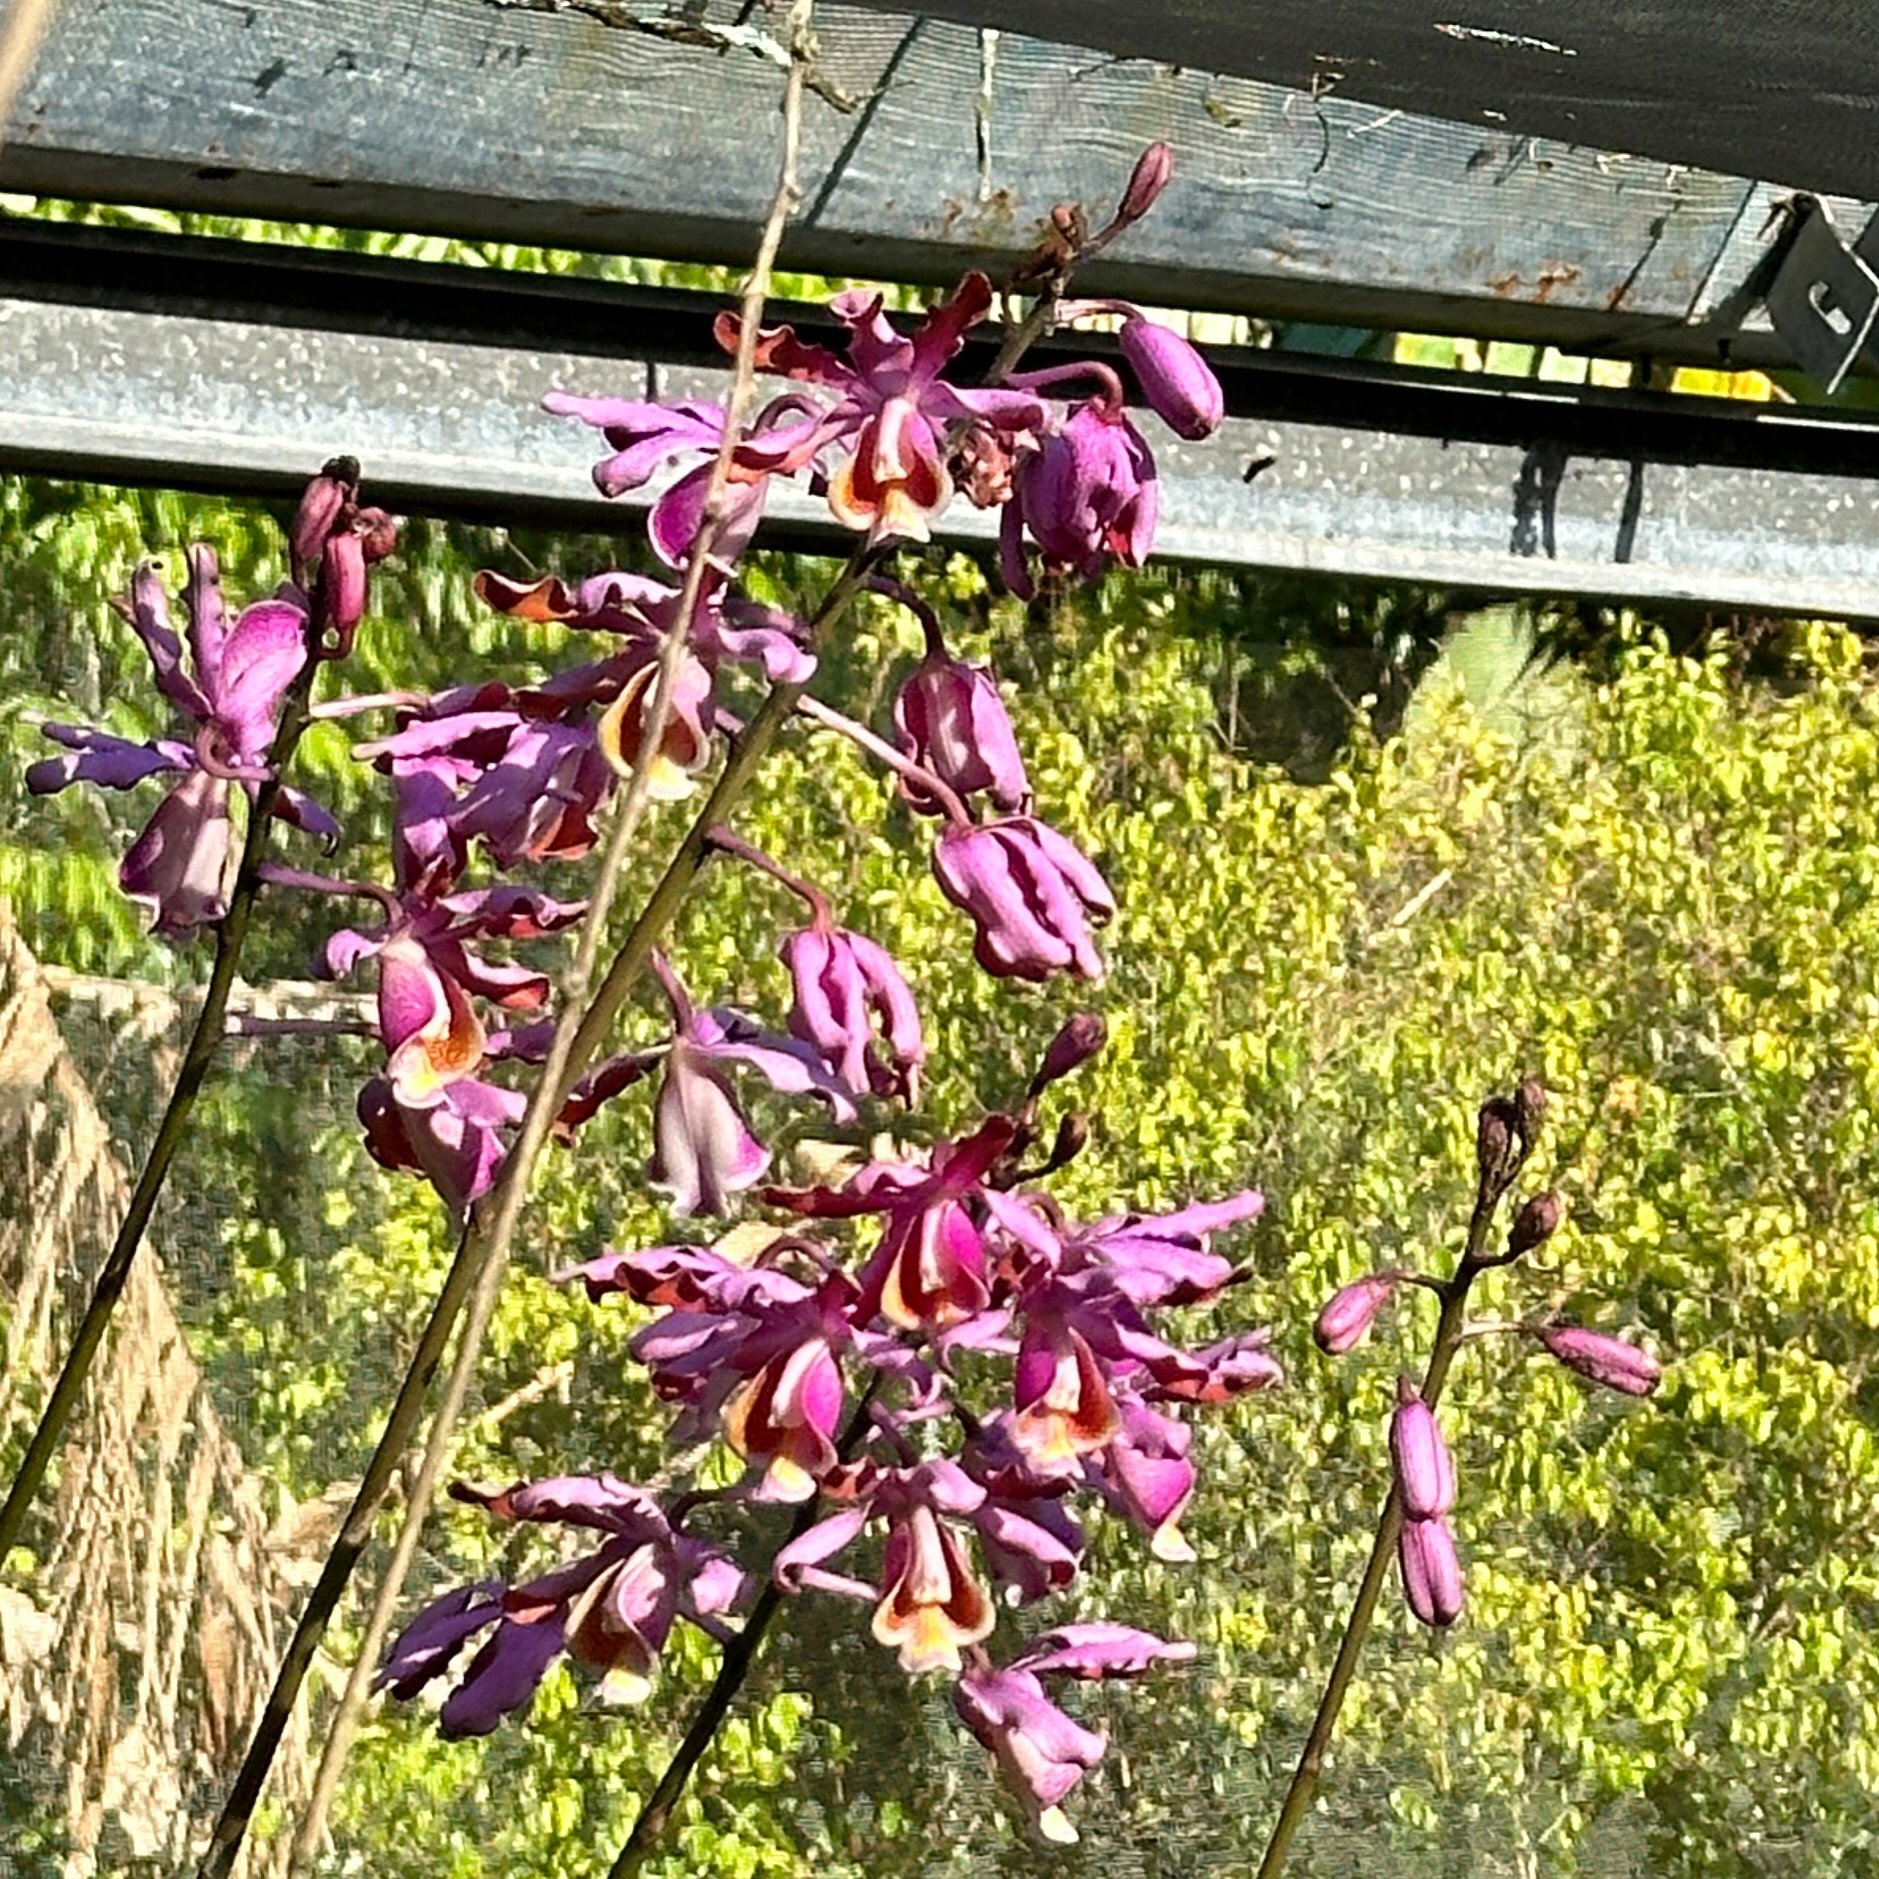 These guys are Myrmecro-feeling themselves this morning! All Redland ready! We&rsquo;ll see you in a couple weeks. Get your tickets today at RedlandOrchidFestival.com OOF typing so hard! Ok&mdash;navigate to @orchidfestival and while you&rsquo;re the